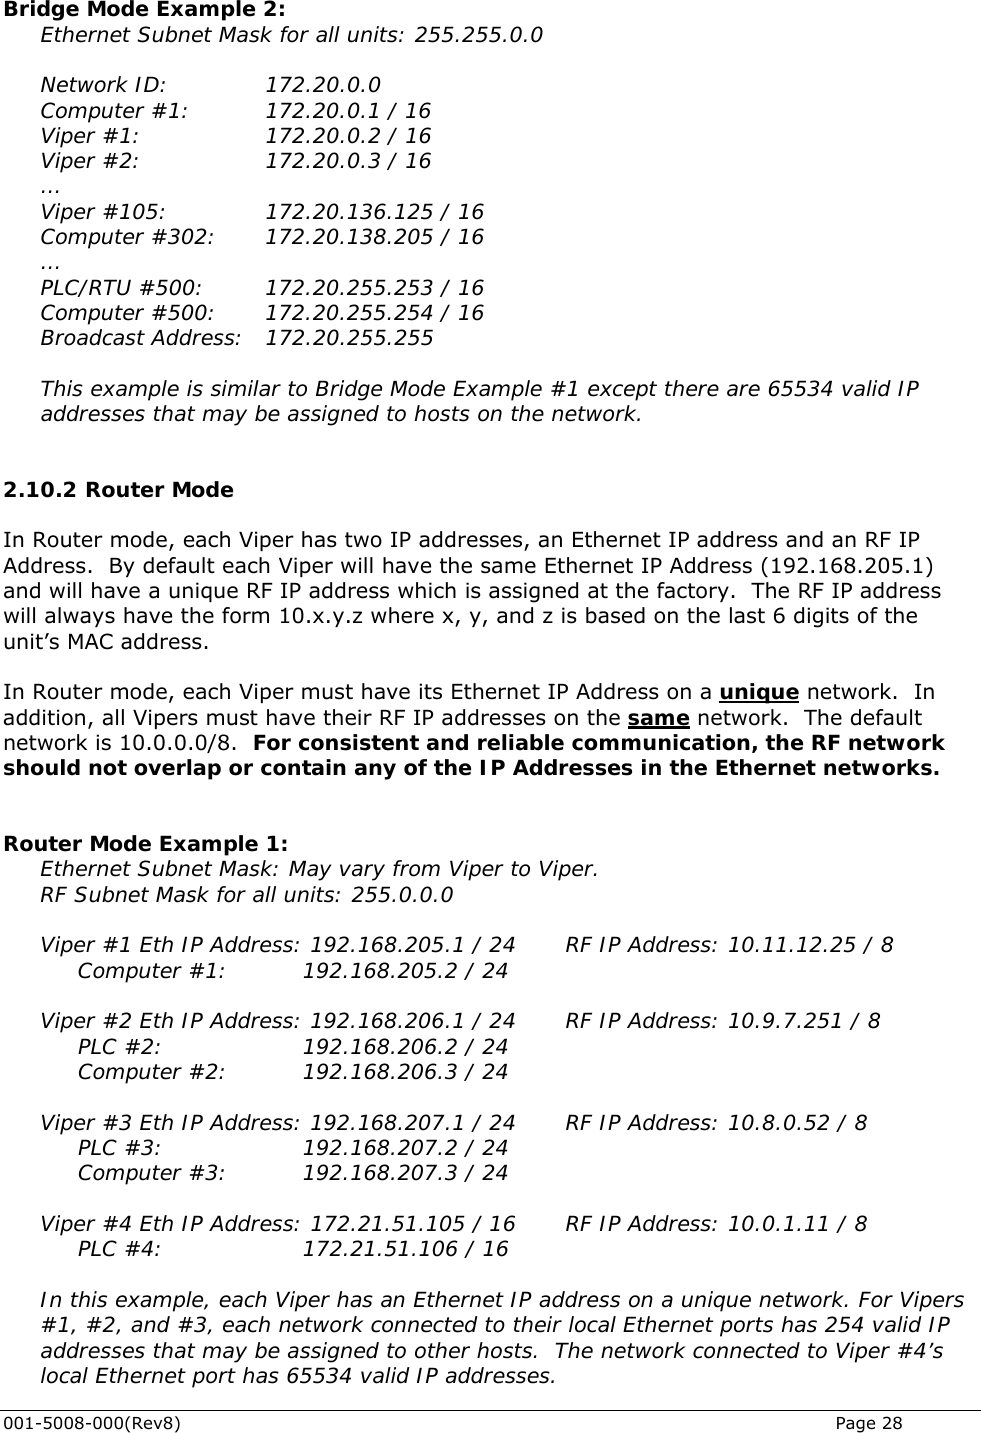  001-5008-000(Rev8)   Page 28  Bridge Mode Example 2: Ethernet Subnet Mask for all units: 255.255.0.0  Network ID:    172.20.0.0 Computer #1:    172.20.0.1 / 16 Viper #1:     172.20.0.2 / 16 Viper #2:     172.20.0.3 / 16 … Viper #105:       172.20.136.125 / 16 Computer #302:   172.20.138.205 / 16 … PLC/RTU #500:    172.20.255.253 / 16 Computer #500:    172.20.255.254 / 16 Broadcast Address:   172.20.255.255  This example is similar to Bridge Mode Example #1 except there are 65534 valid IP addresses that may be assigned to hosts on the network.  2.10.2  Router Mode In Router mode, each Viper has two IP addresses, an Ethernet IP address and an RF IP Address.  By default each Viper will have the same Ethernet IP Address (192.168.205.1) and will have a unique RF IP address which is assigned at the factory.  The RF IP address will always have the form 10.x.y.z where x, y, and z is based on the last 6 digits of the unit’s MAC address.  In Router mode, each Viper must have its Ethernet IP Address on a unique network.  In addition, all Vipers must have their RF IP addresses on the same network.  The default network is 10.0.0.0/8.  For consistent and reliable communication, the RF network should not overlap or contain any of the IP Addresses in the Ethernet networks.   Router Mode Example 1:  Ethernet Subnet Mask: May vary from Viper to Viper. RF Subnet Mask for all units: 255.0.0.0  Viper #1 Eth IP Address: 192.168.205.1 / 24    RF IP Address: 10.11.12.25 / 8 Computer #1:     192.168.205.2 / 24  Viper #2 Eth IP Address: 192.168.206.1 / 24    RF IP Address: 10.9.7.251 / 8  PLC #2:     192.168.206.2 / 24  Computer #2:  192.168.206.3 / 24  Viper #3 Eth IP Address: 192.168.207.1 / 24    RF IP Address: 10.8.0.52 / 8  PLC #3:     192.168.207.2 / 24  Computer #3:  192.168.207.3 / 24  Viper #4 Eth IP Address: 172.21.51.105 / 16    RF IP Address: 10.0.1.11 / 8  PLC #4:     172.21.51.106 / 16  In this example, each Viper has an Ethernet IP address on a unique network. For Vipers #1, #2, and #3, each network connected to their local Ethernet ports has 254 valid IP addresses that may be assigned to other hosts.  The network connected to Viper #4’s local Ethernet port has 65534 valid IP addresses. 